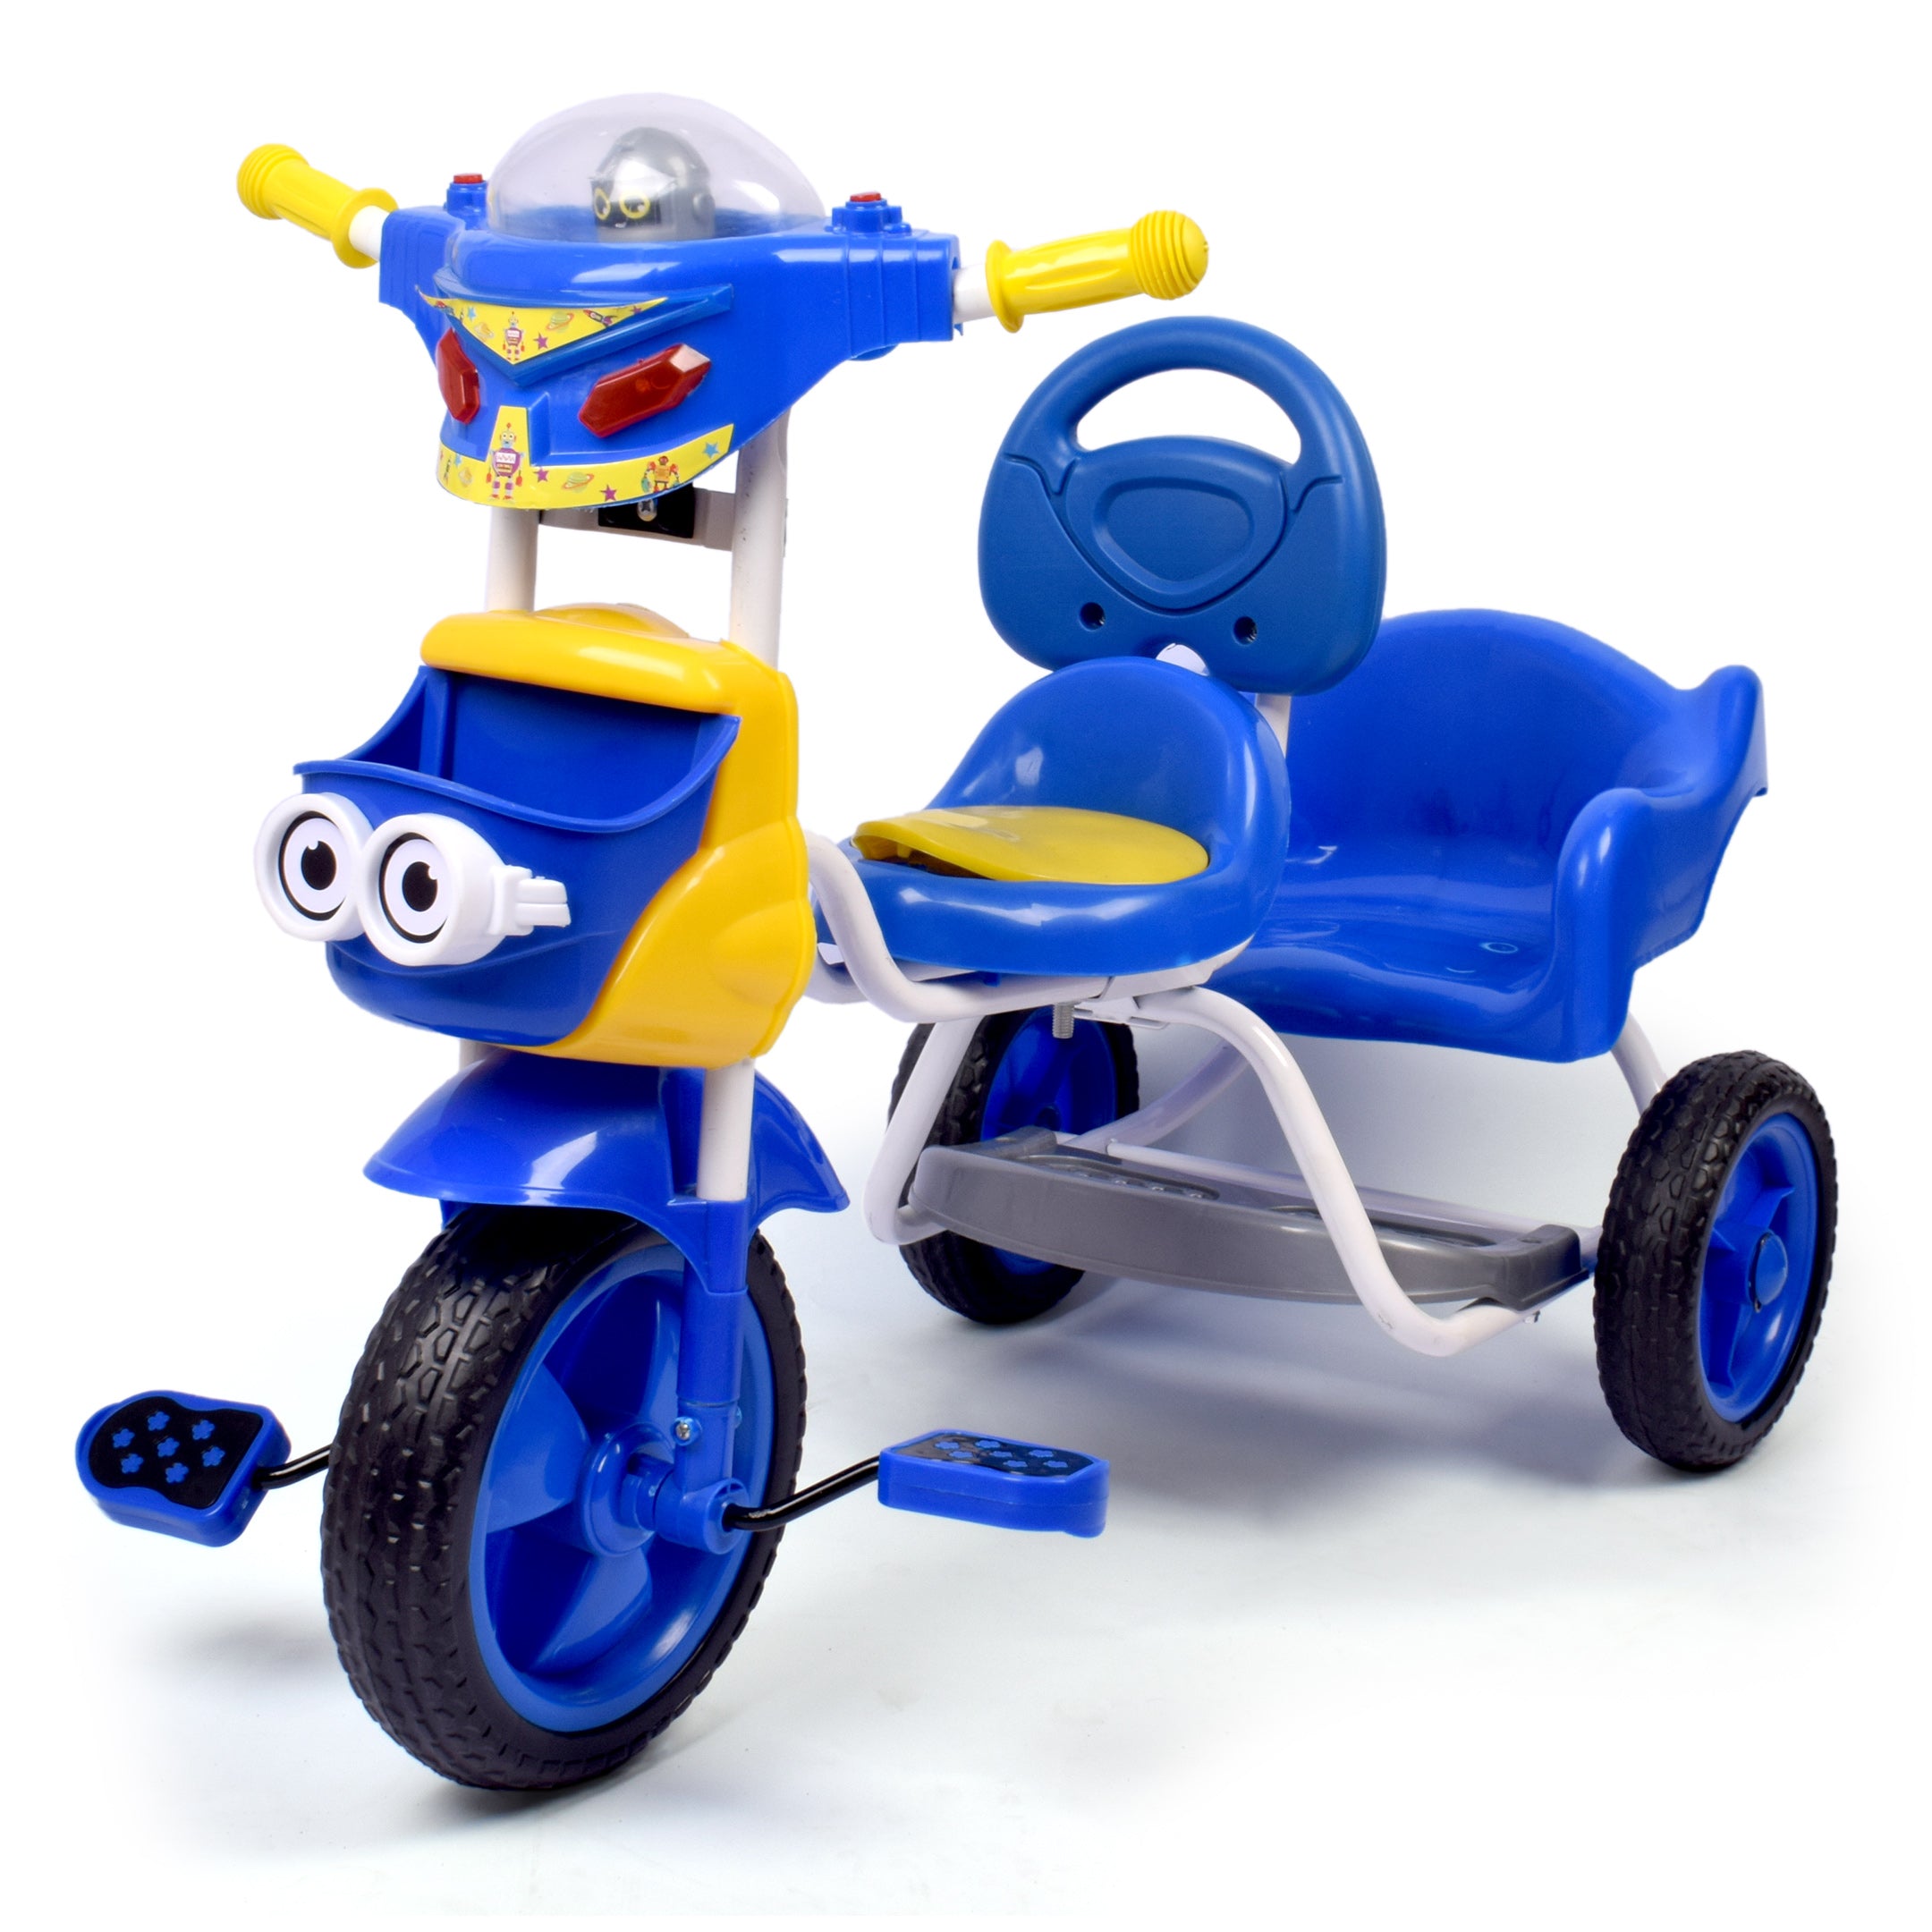 Kids Robot Twin Seater Tricycle - Blue